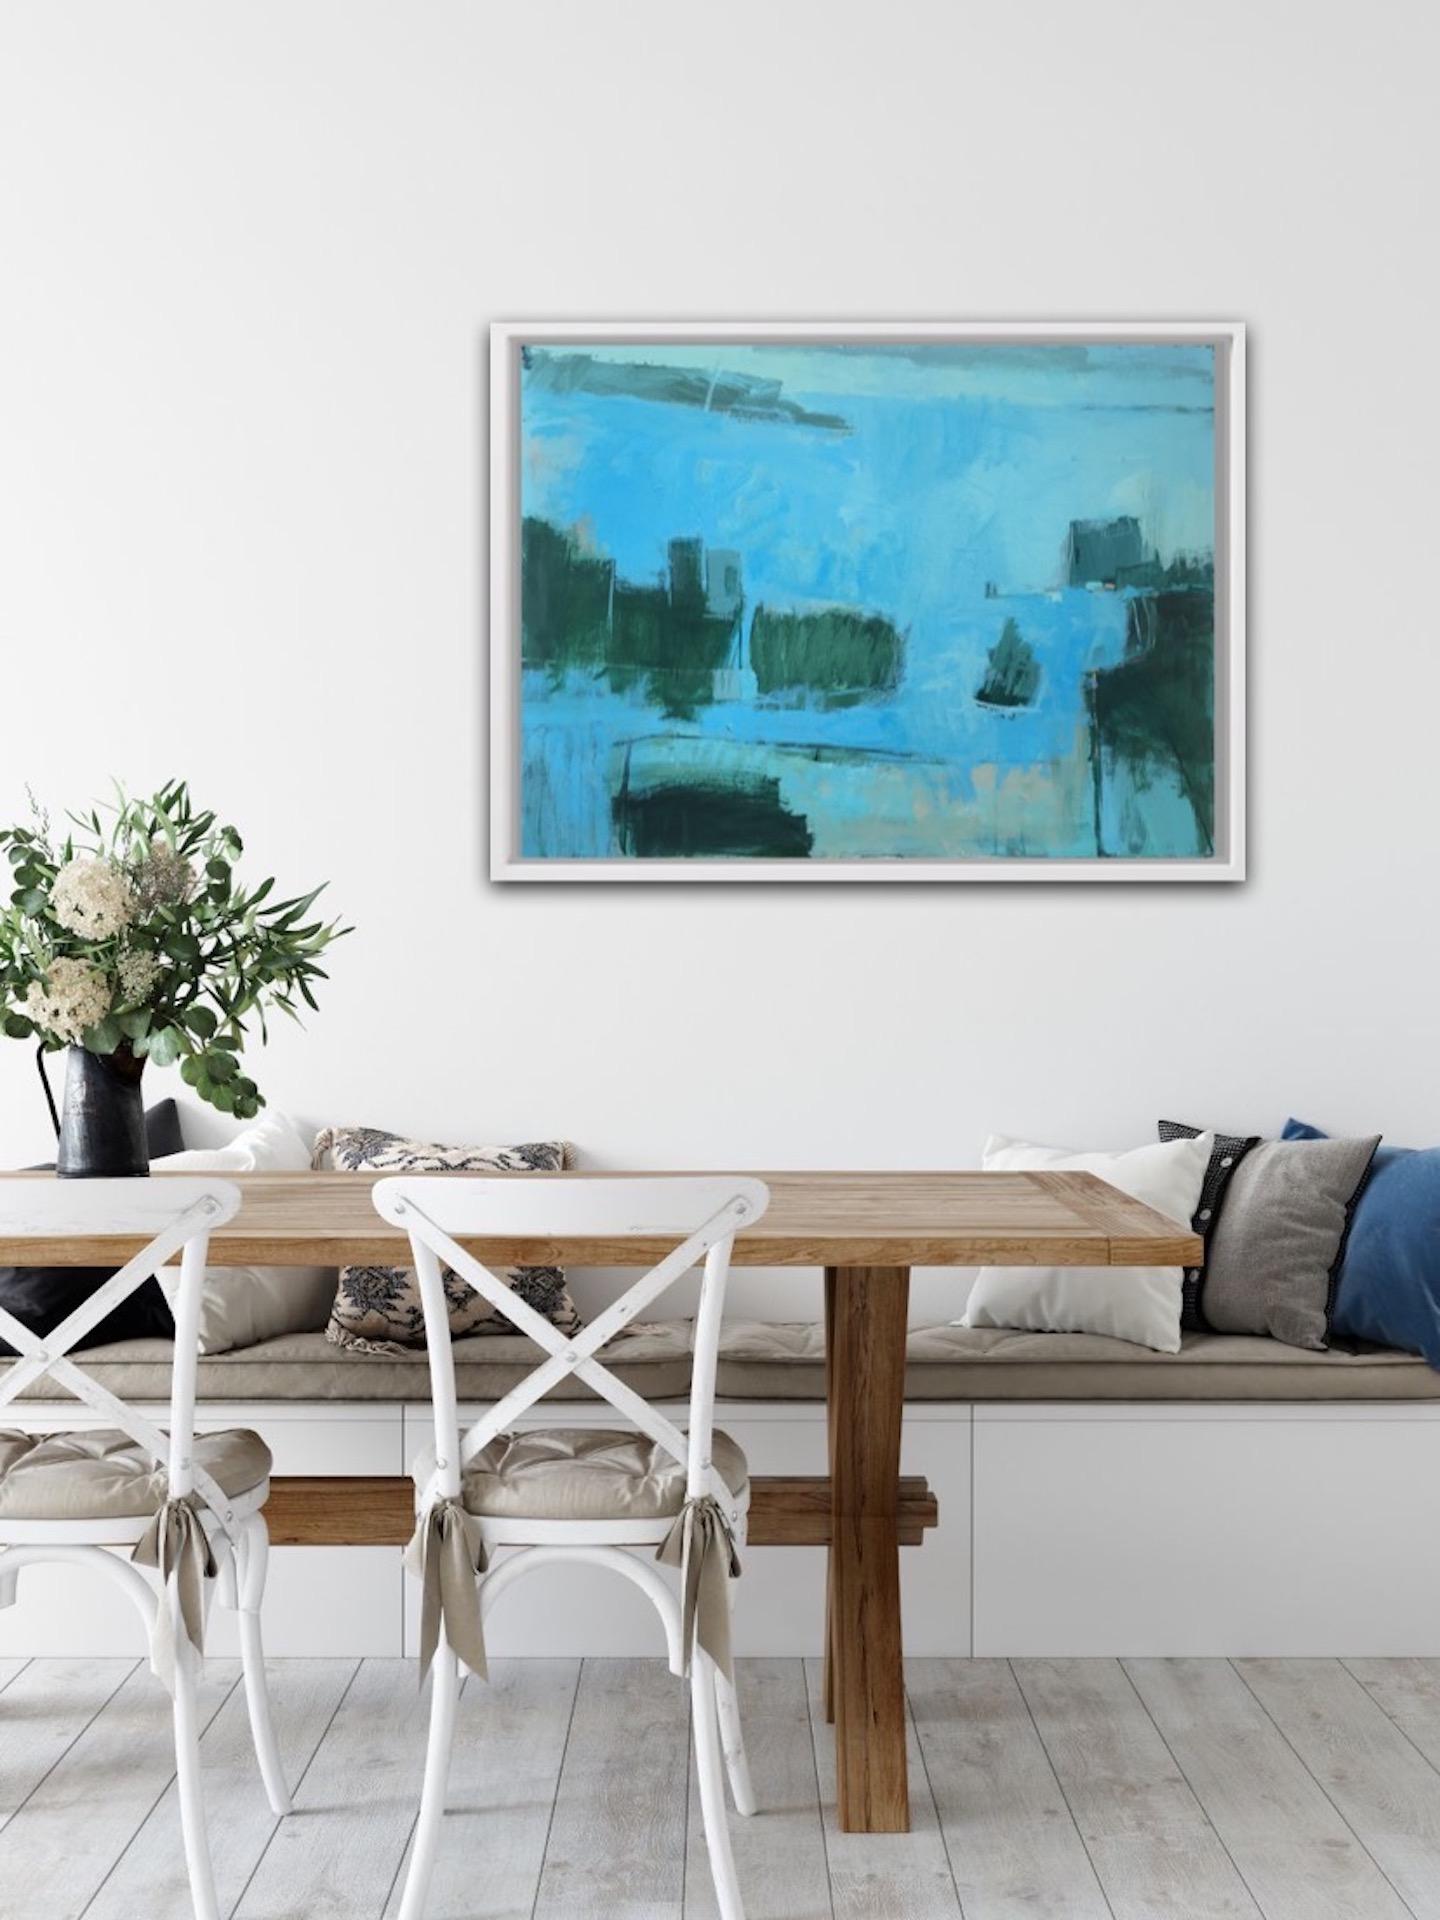 Janet Keith
Strong Fjord
Original abstract landscape painting
Acrylic on board
 Image Size: H76cm x W101cm x D 0.30cm
Sold Unframed
Free Shipping 
Please note that in situ images are purely an indication of how a piece may look.

Strong Fjord is an